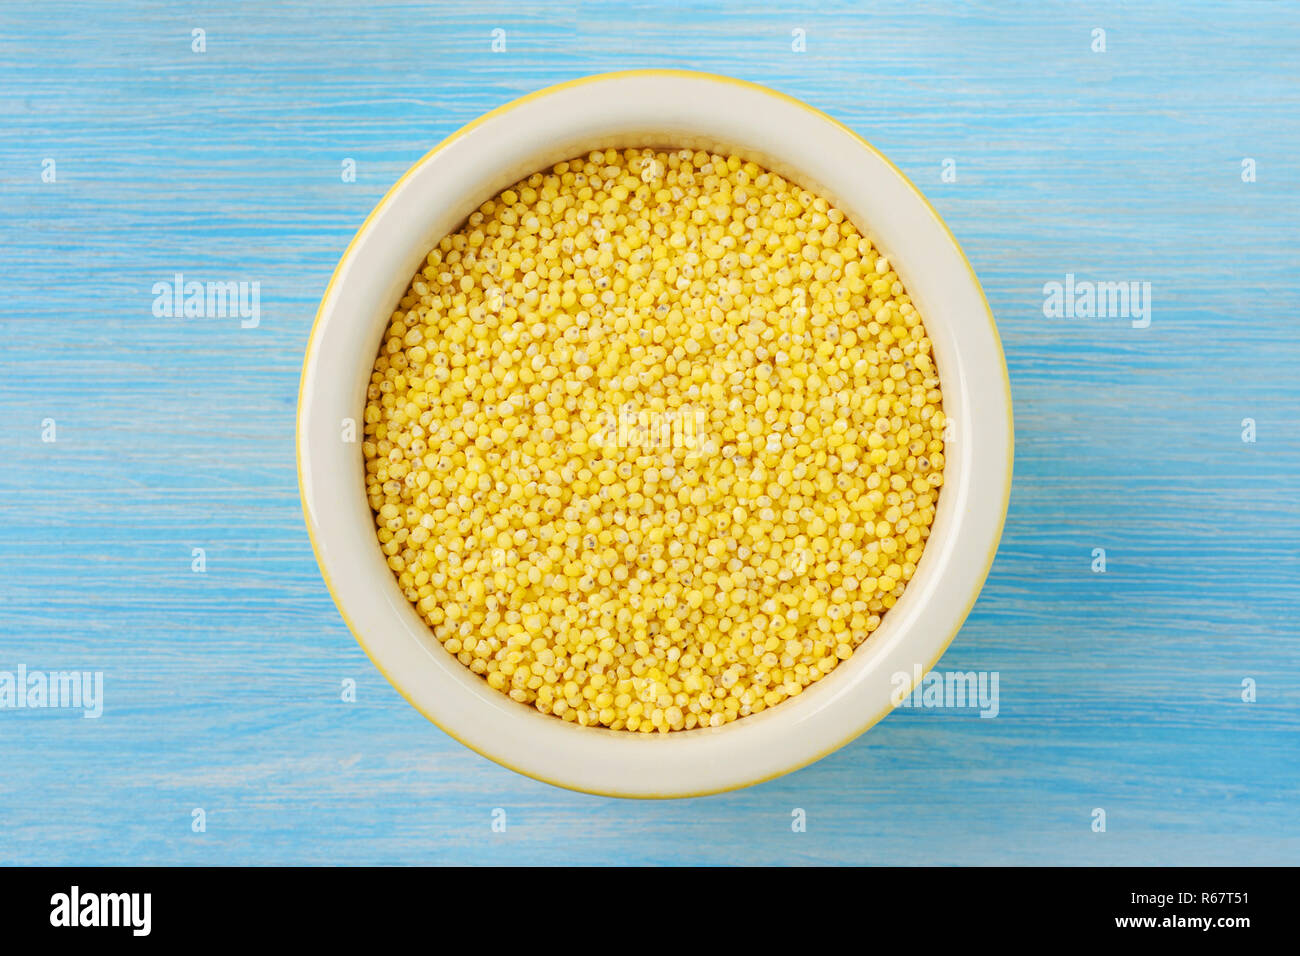 Millet .Grain with  mildly sweet flavor.It  is tasty, soothing, non-acid forming, and contains a myriad of beneficial nutrients. Stock Photo